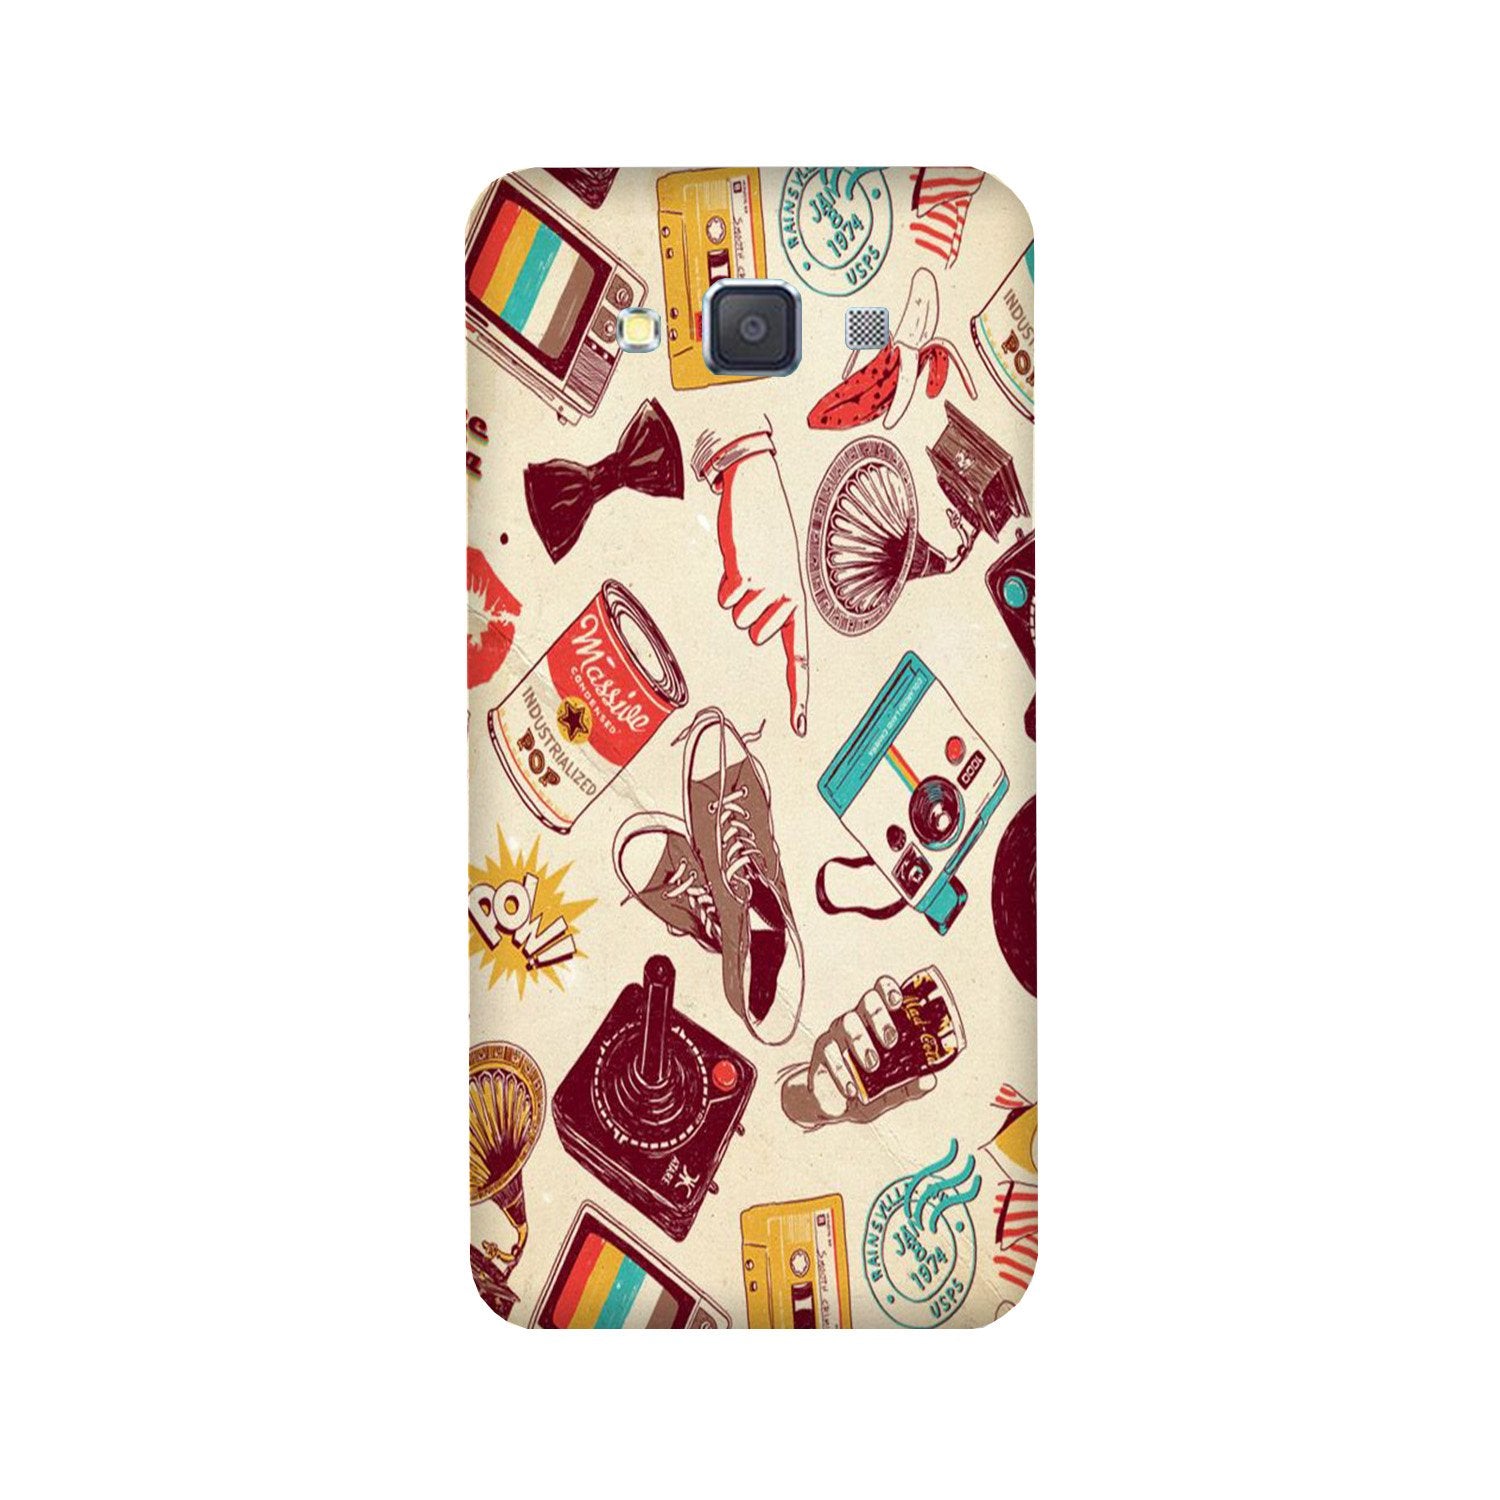 Vintage Case for Galaxy Grand 2